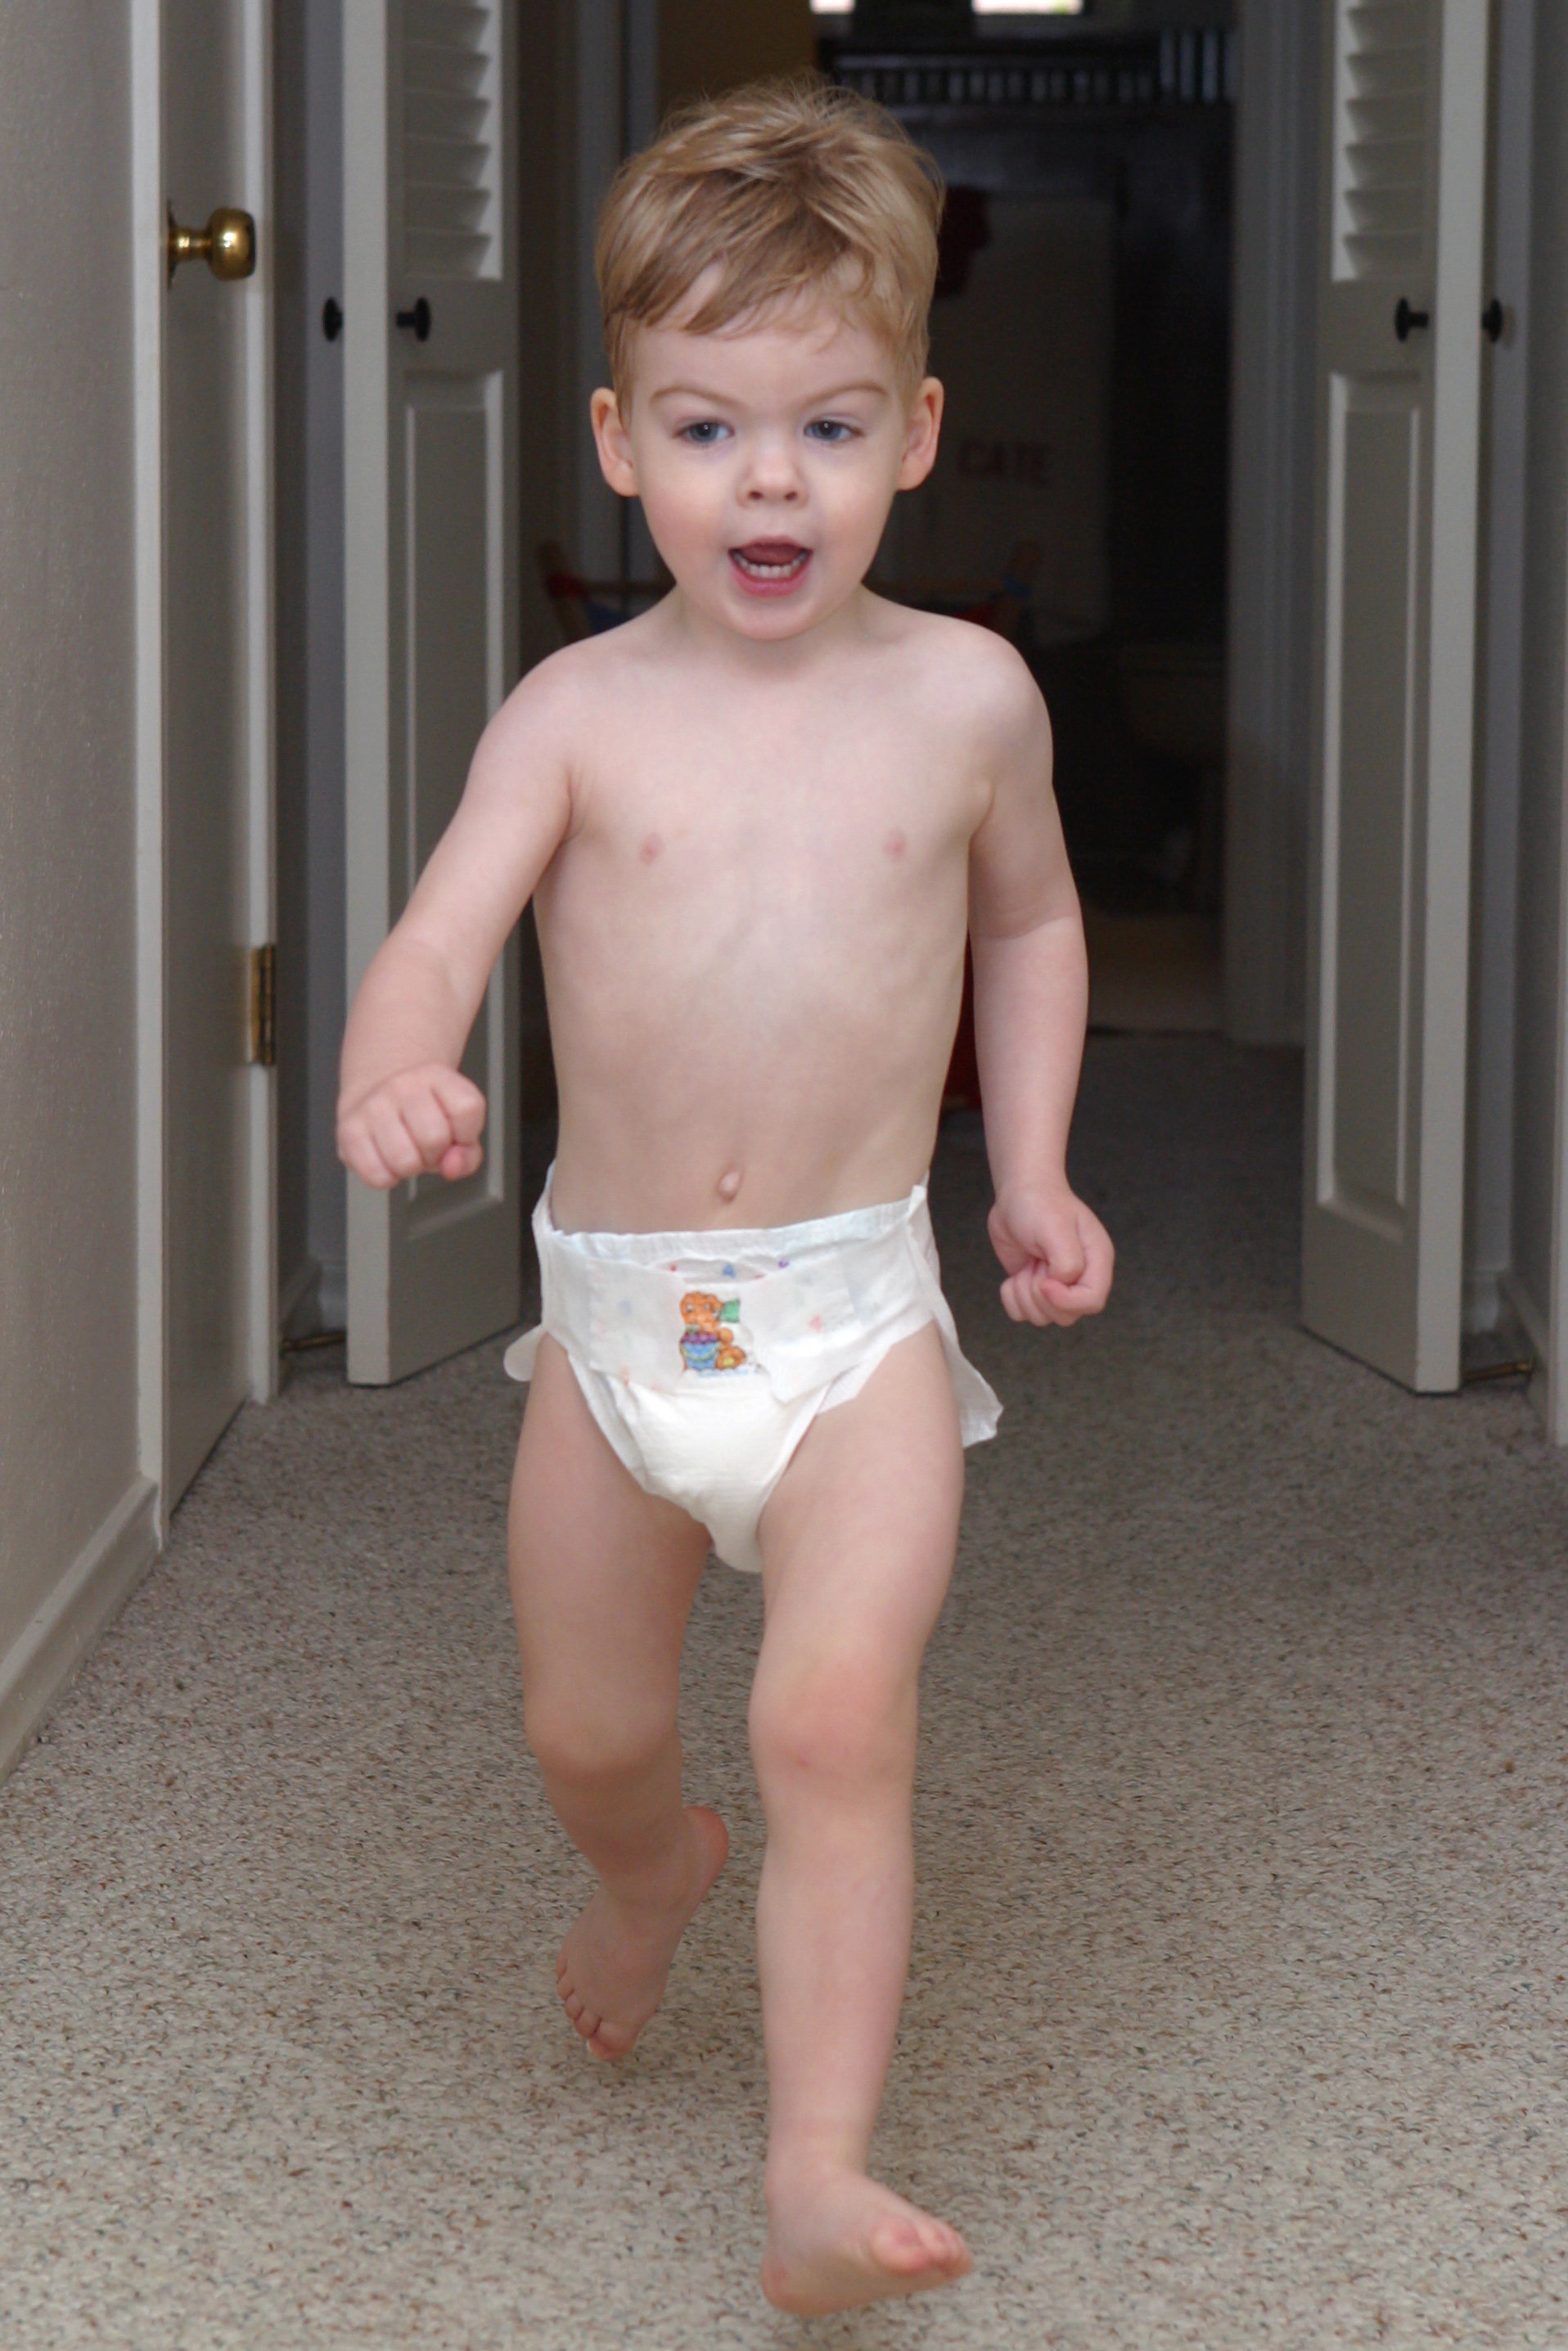 In a refreshing change of pace, Jack now wants to don a diaper before his p...